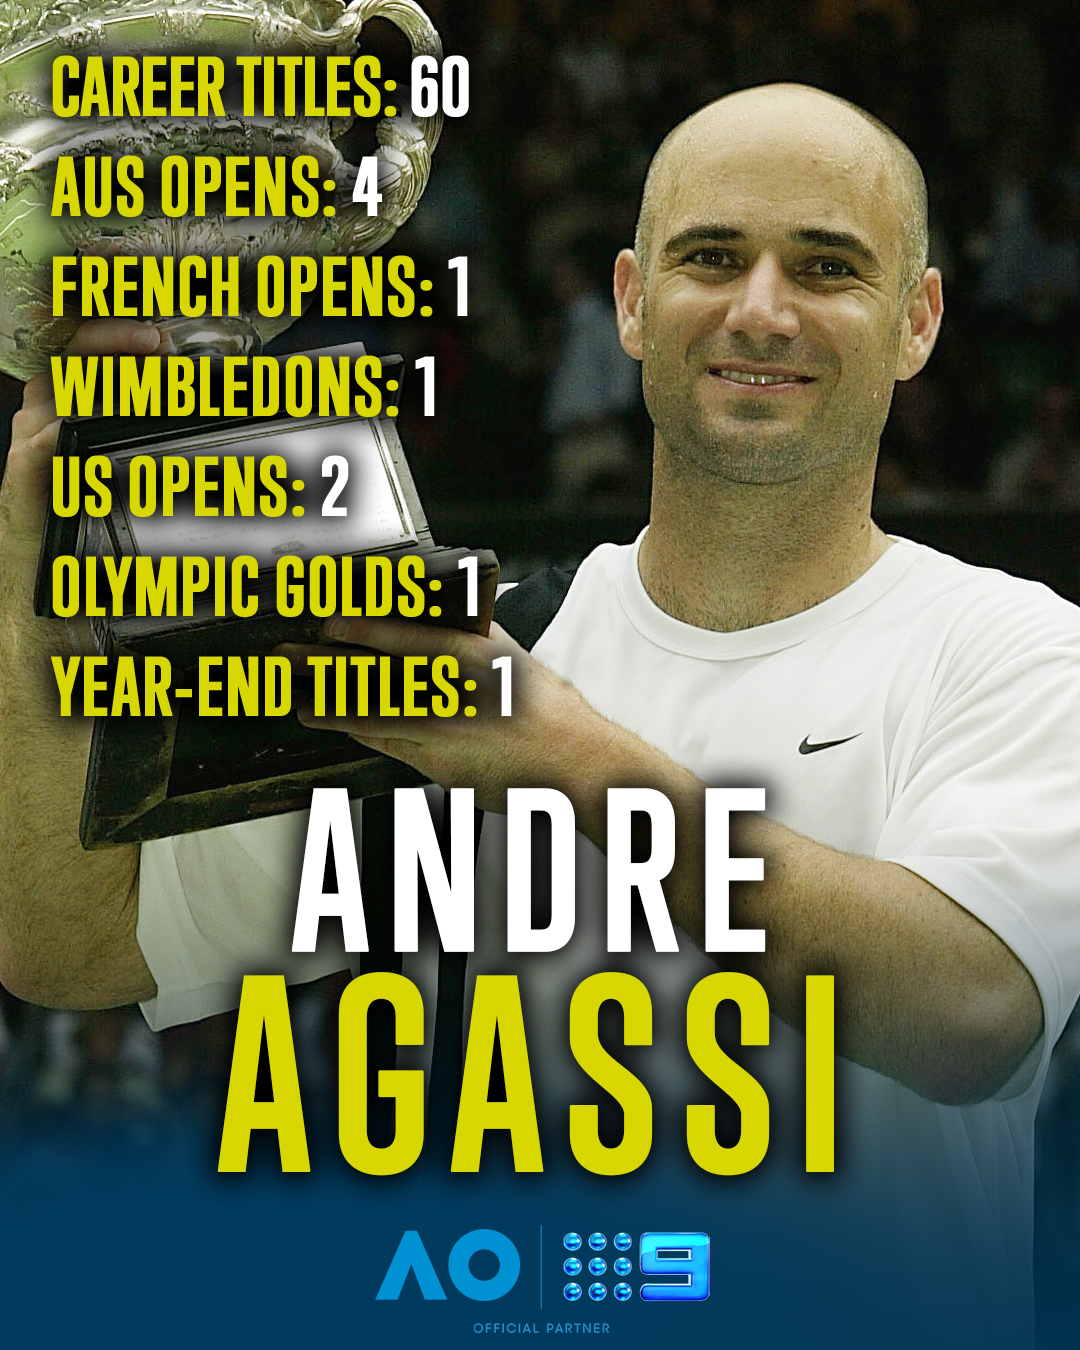 Wishing a VERY happy birthday to the ONLY man to complete the career Super Slam: Andre Agassi!    